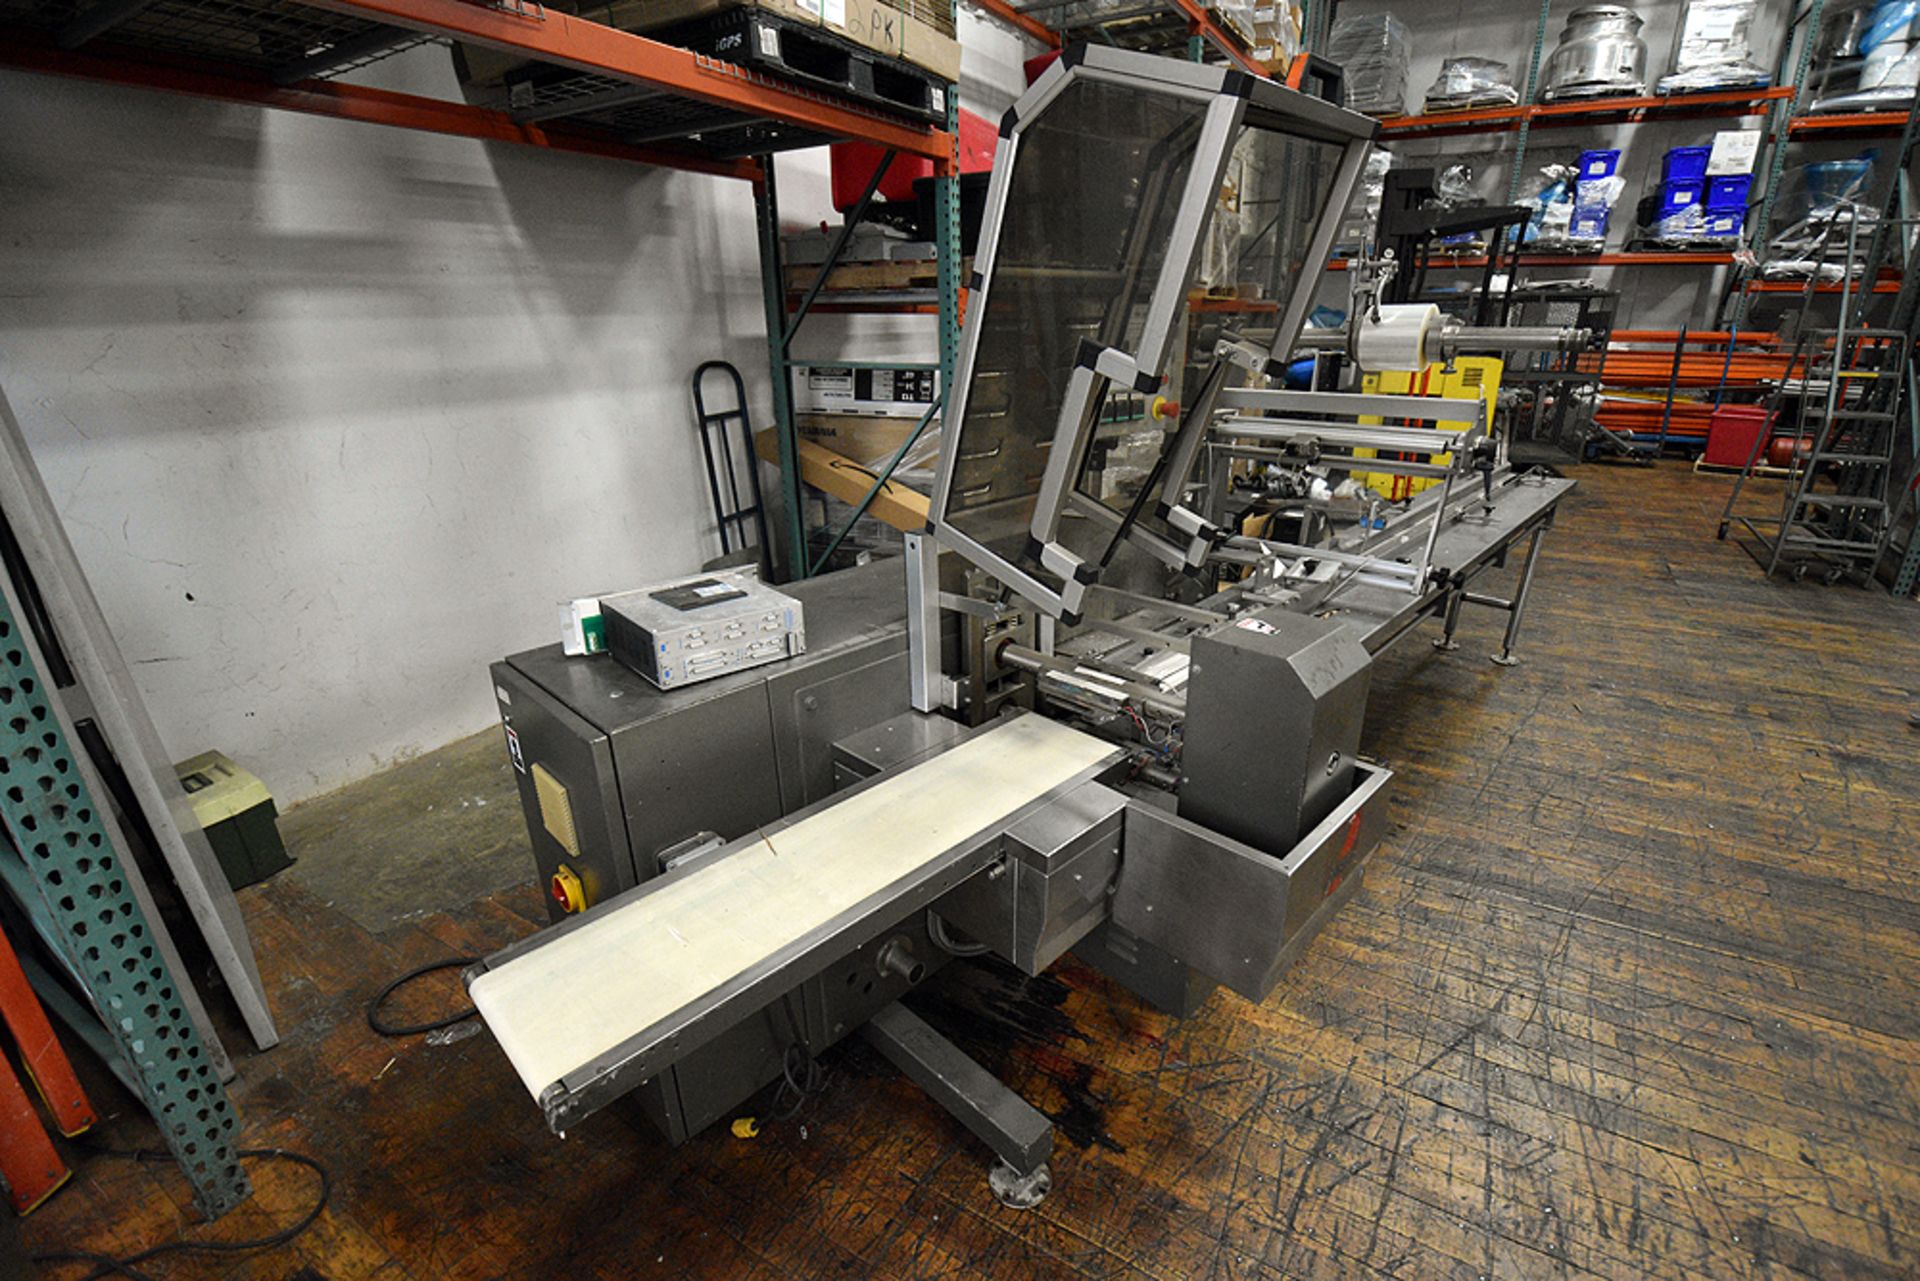 Sasib WE-150 Multi-Axis Horizontal Flo-Wrapper Line w/Attachments (See Pictures for Reference) - Image 5 of 20